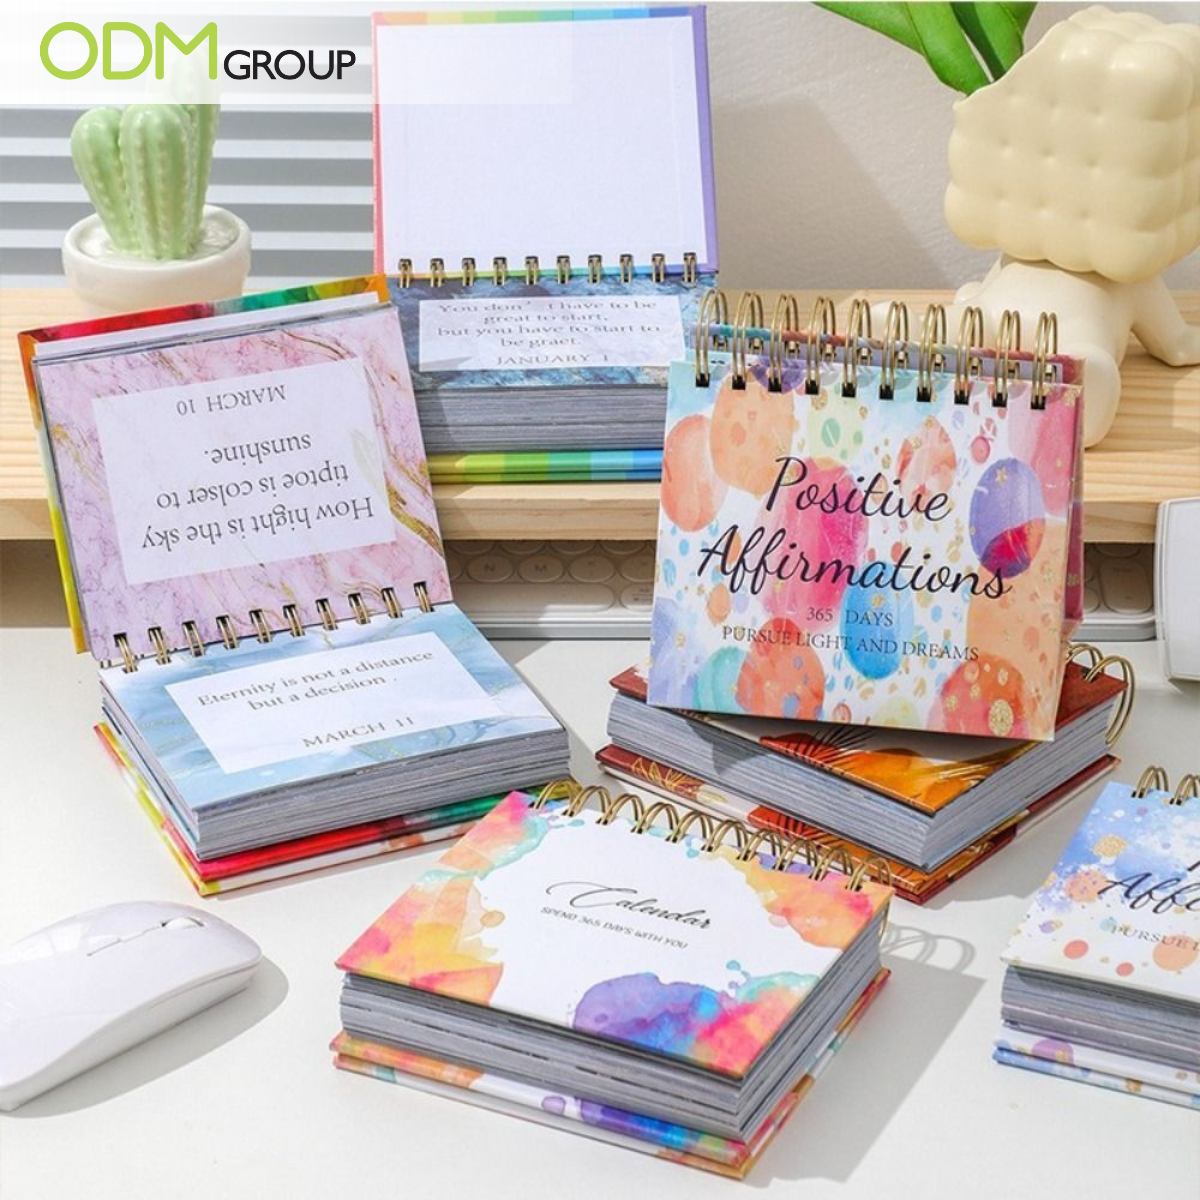 Desk calendars with colorful covers and pages filled with positive affirmations.